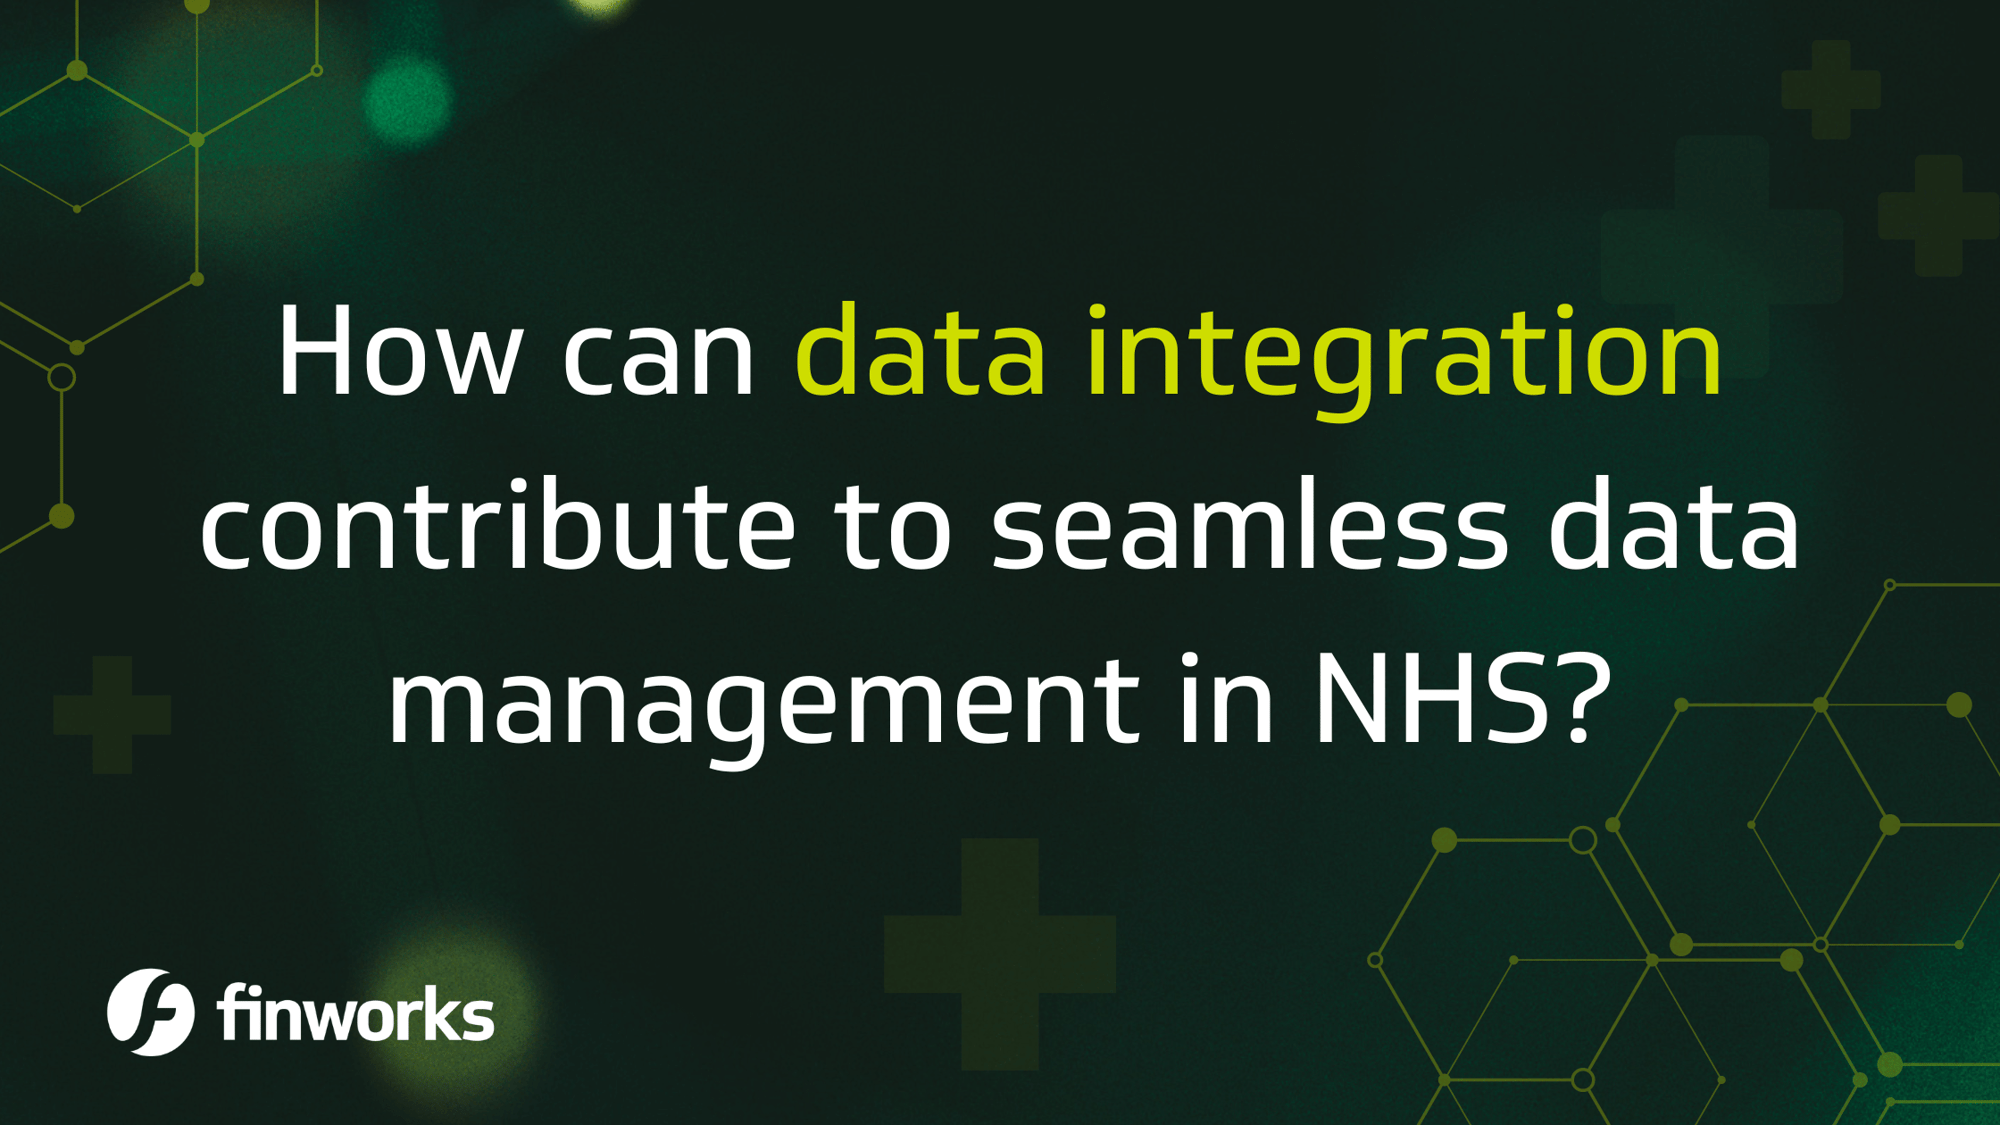 How can data integration contribute to seamless data management in NHS?